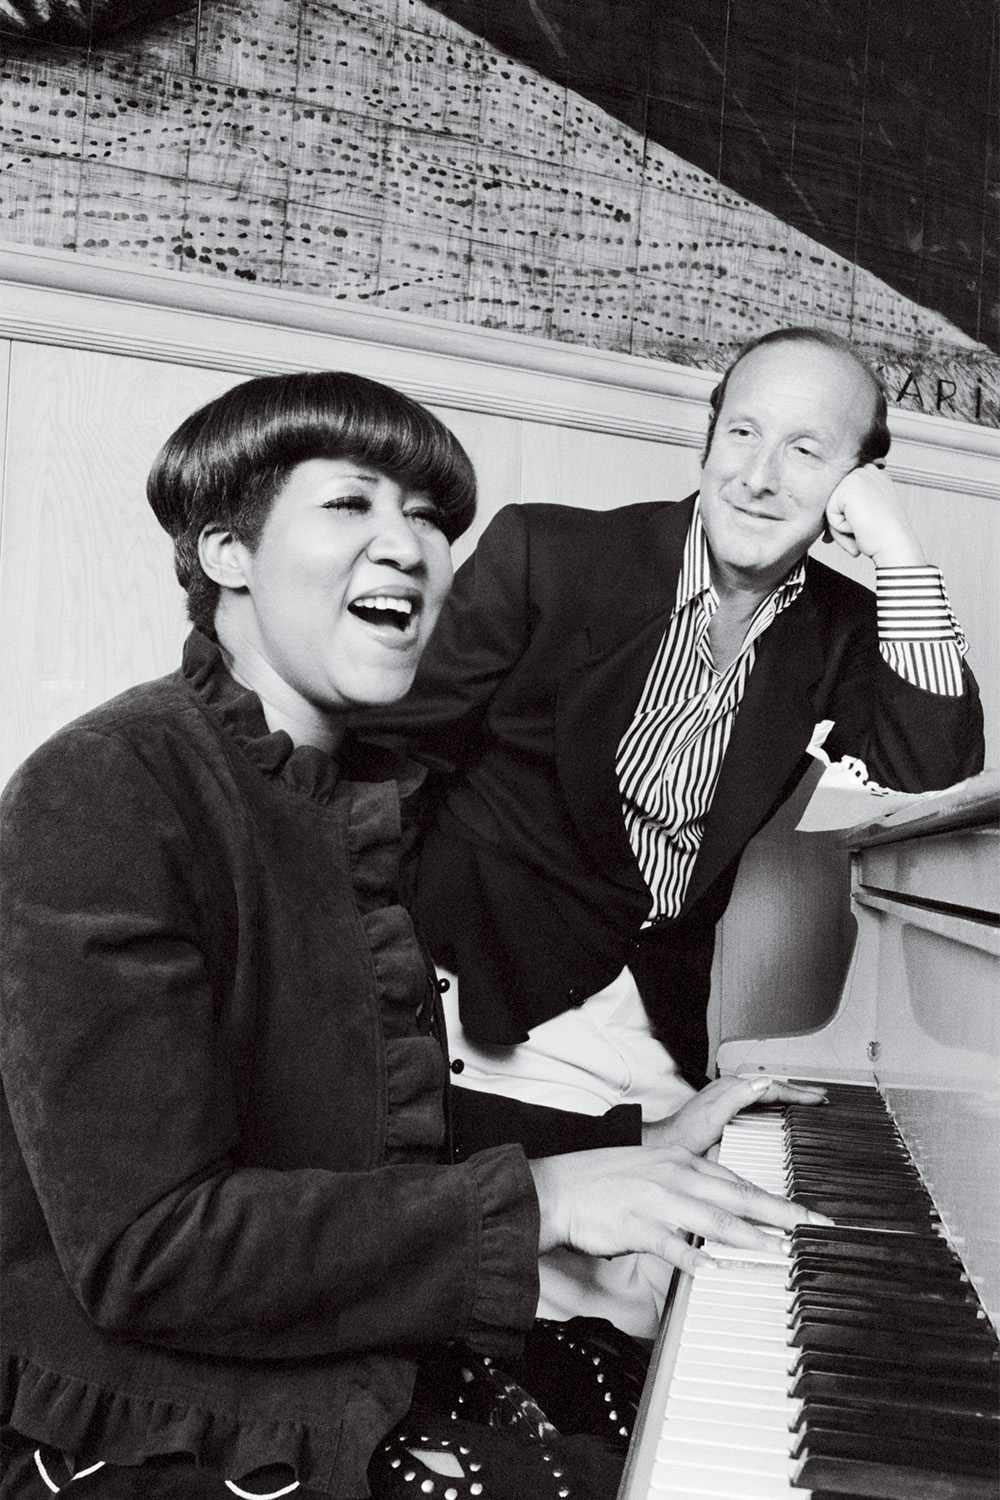 Aretha Franklin and Clive Davis (Photo by © Roger Ressmeyer/CORBIS/VCG via Getty Images) 1981